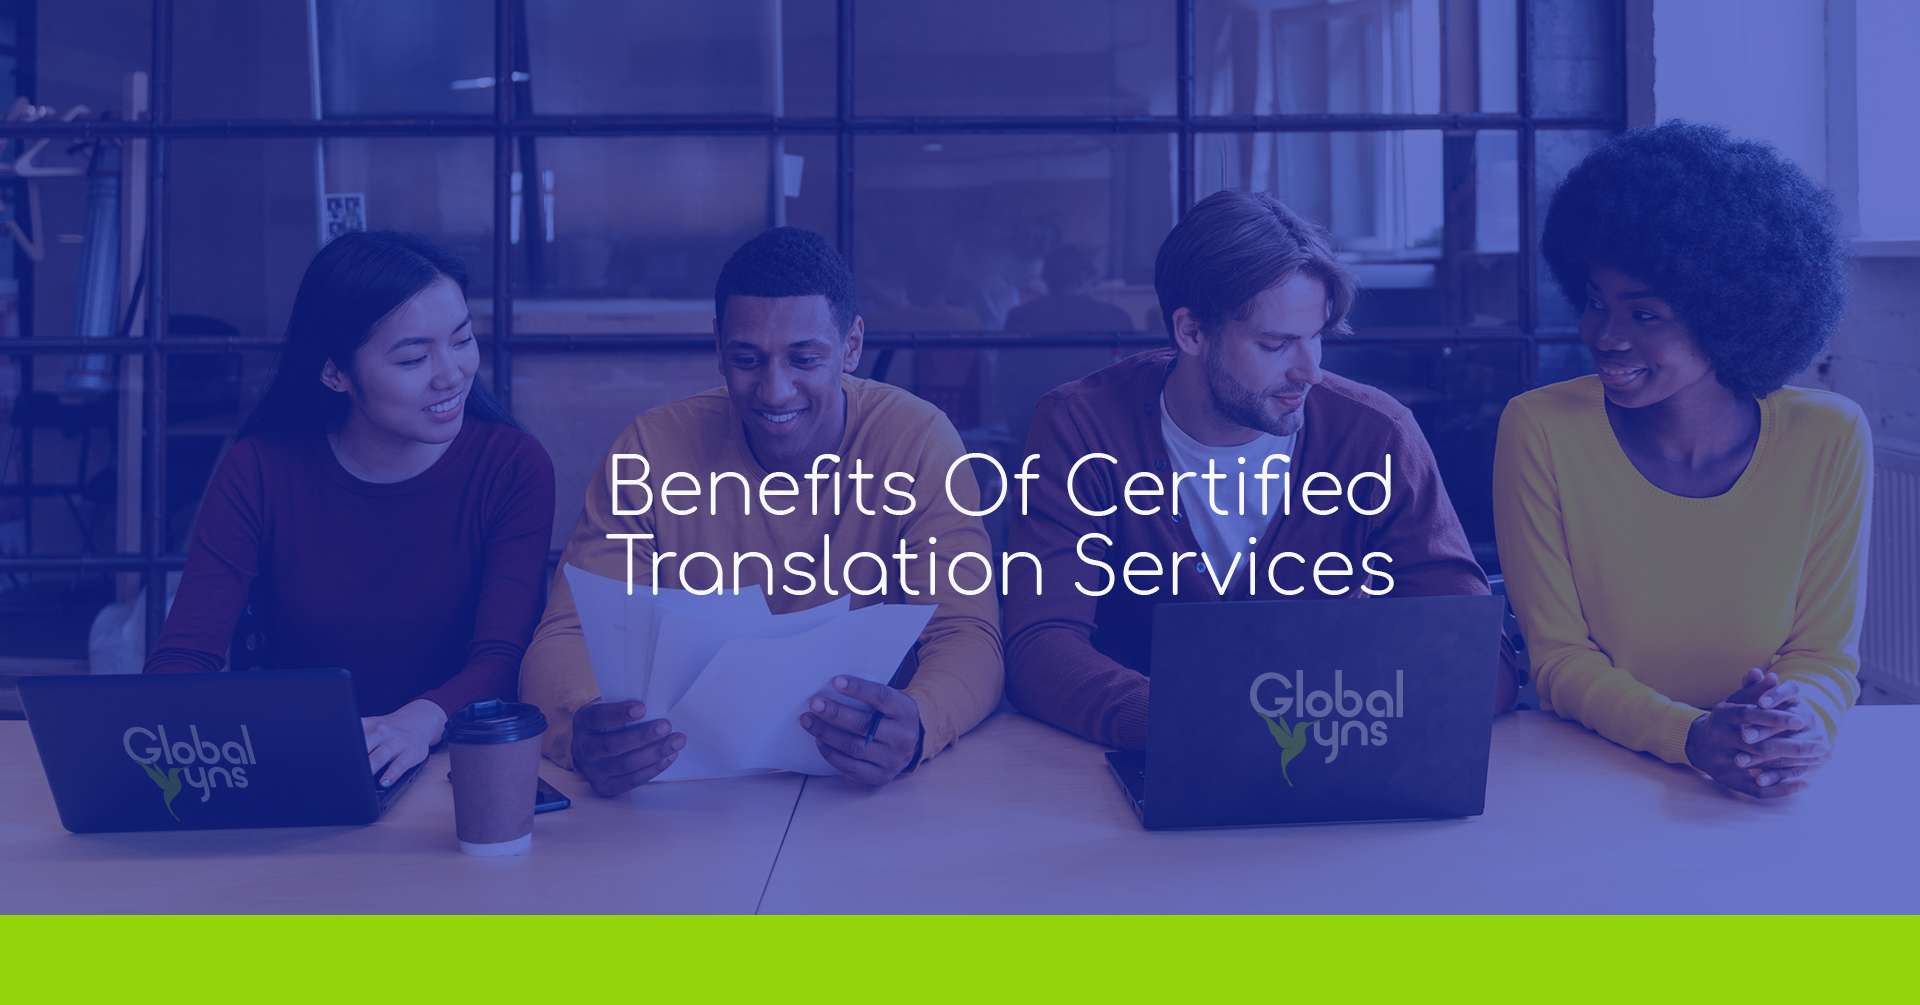 The Benefits Of Certified Document Translation Services